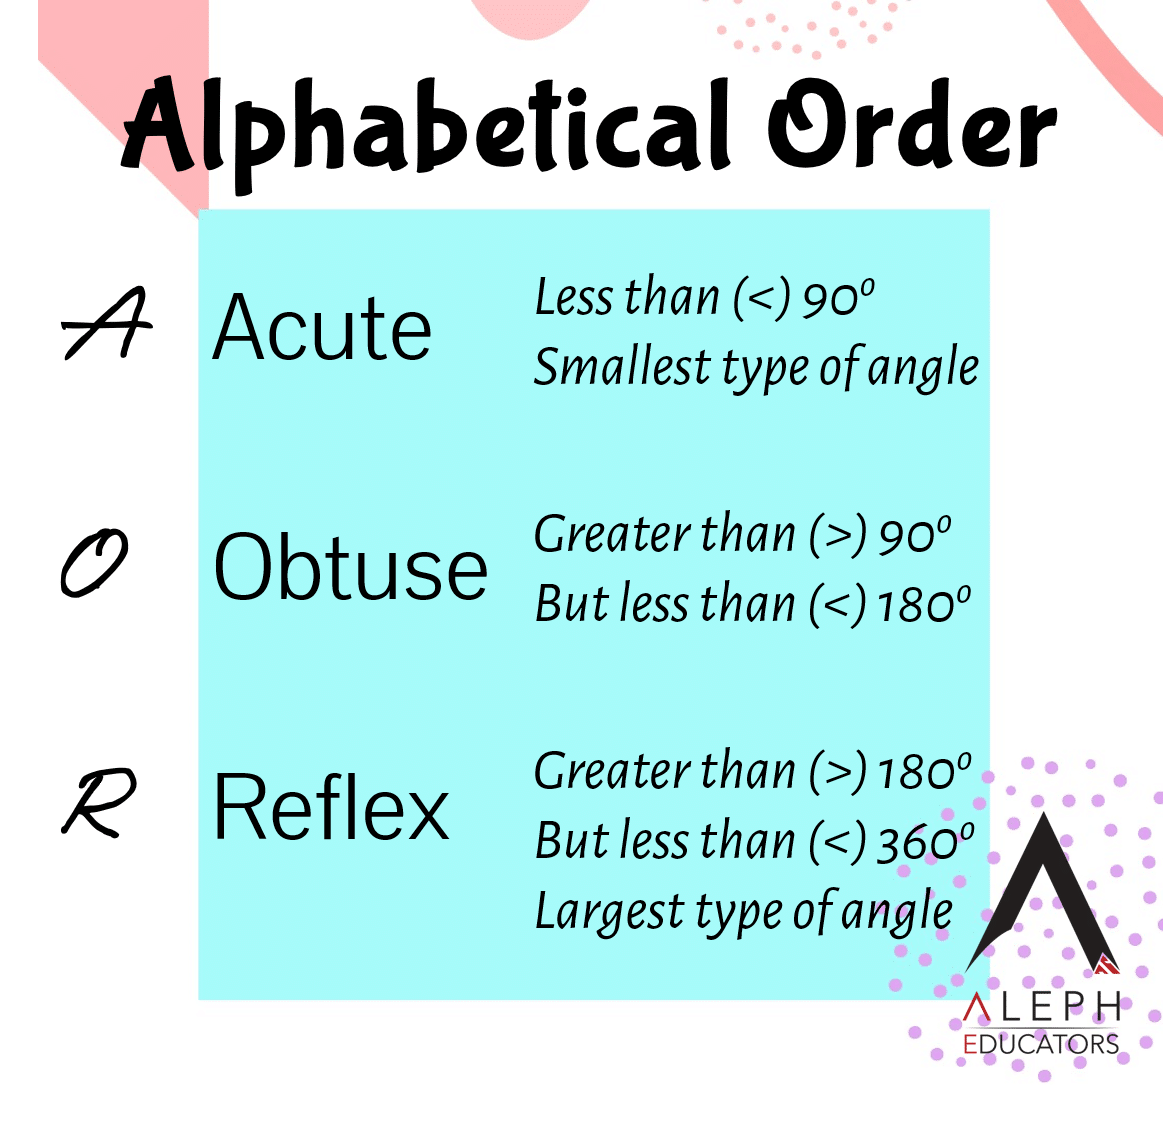 Alphabetical Order of Angles